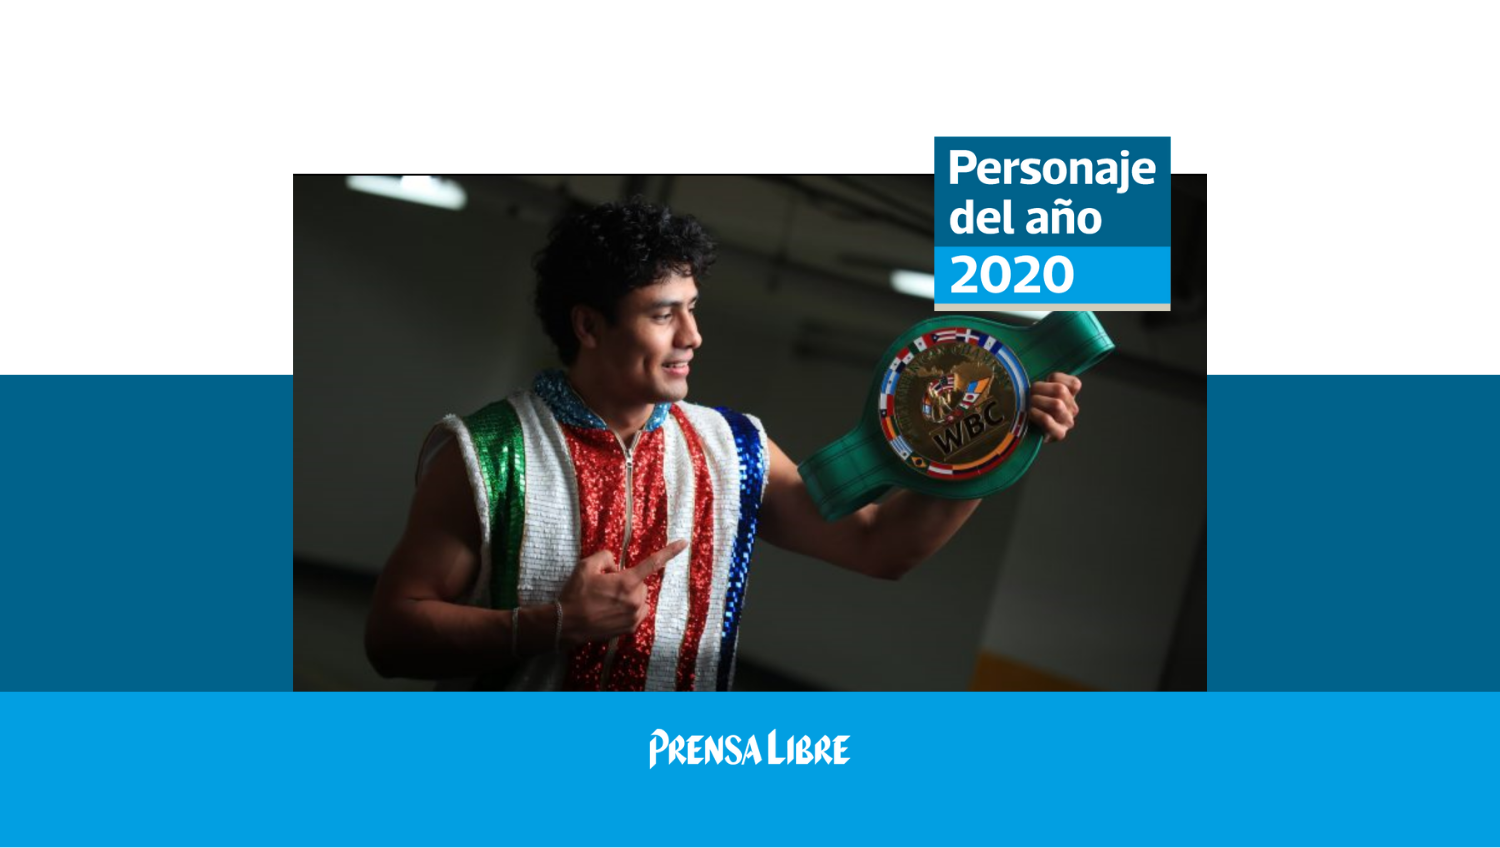 Boxer Léster Martínez has been named as the Sports Person of the Year 2020 – Free Press